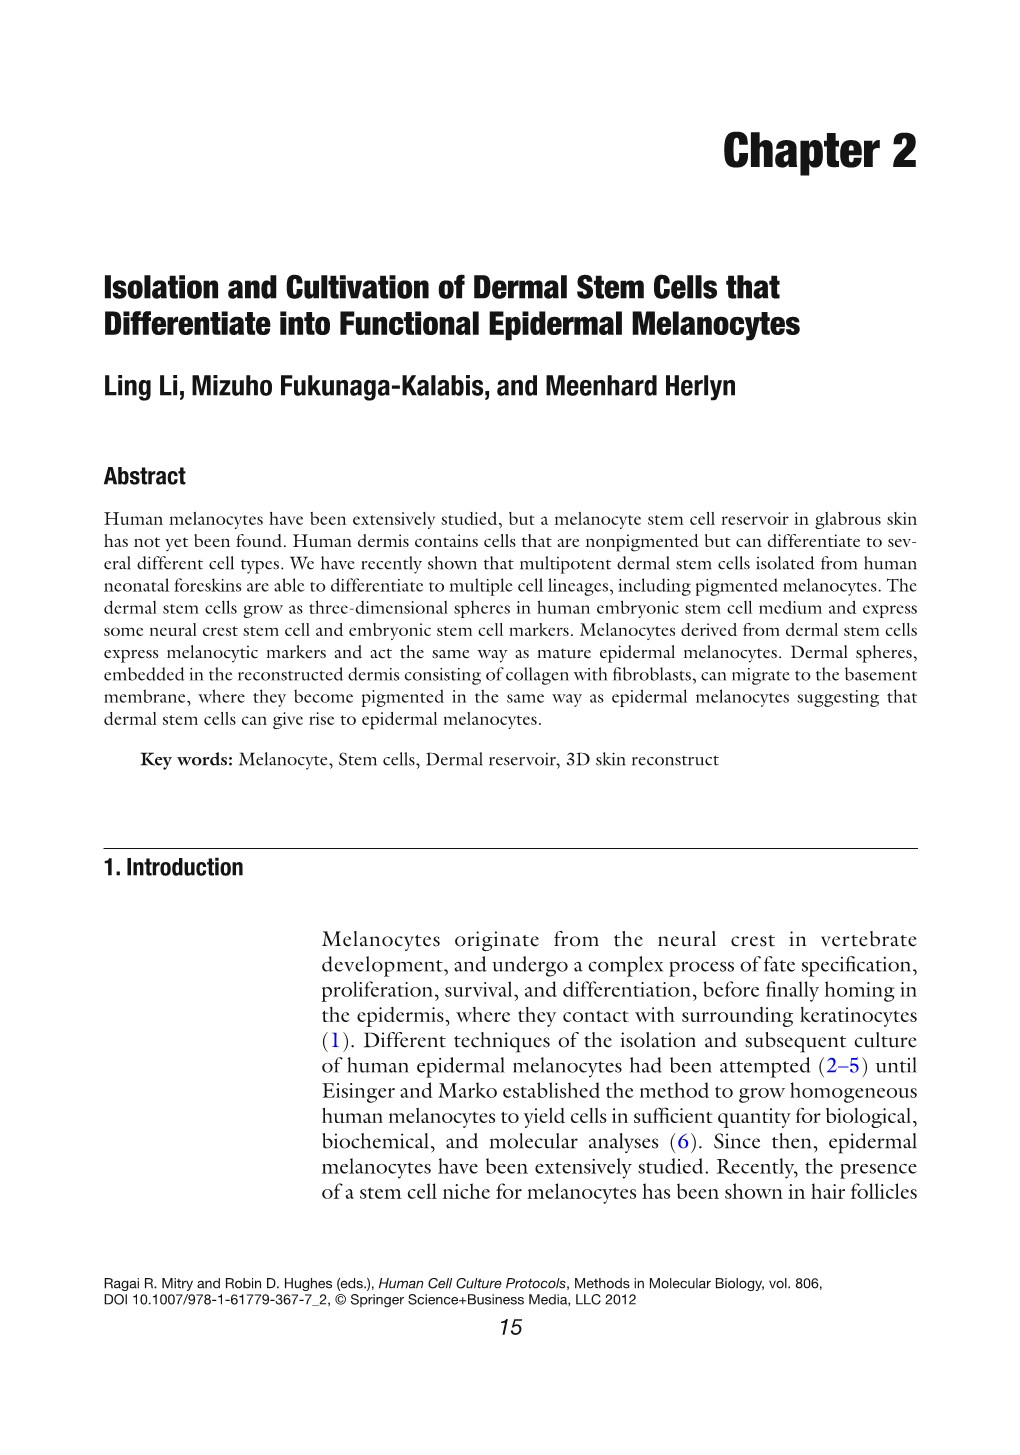 Chapter 2 Isolation and Cultivation of Dermal Stem Cells That Differentiate